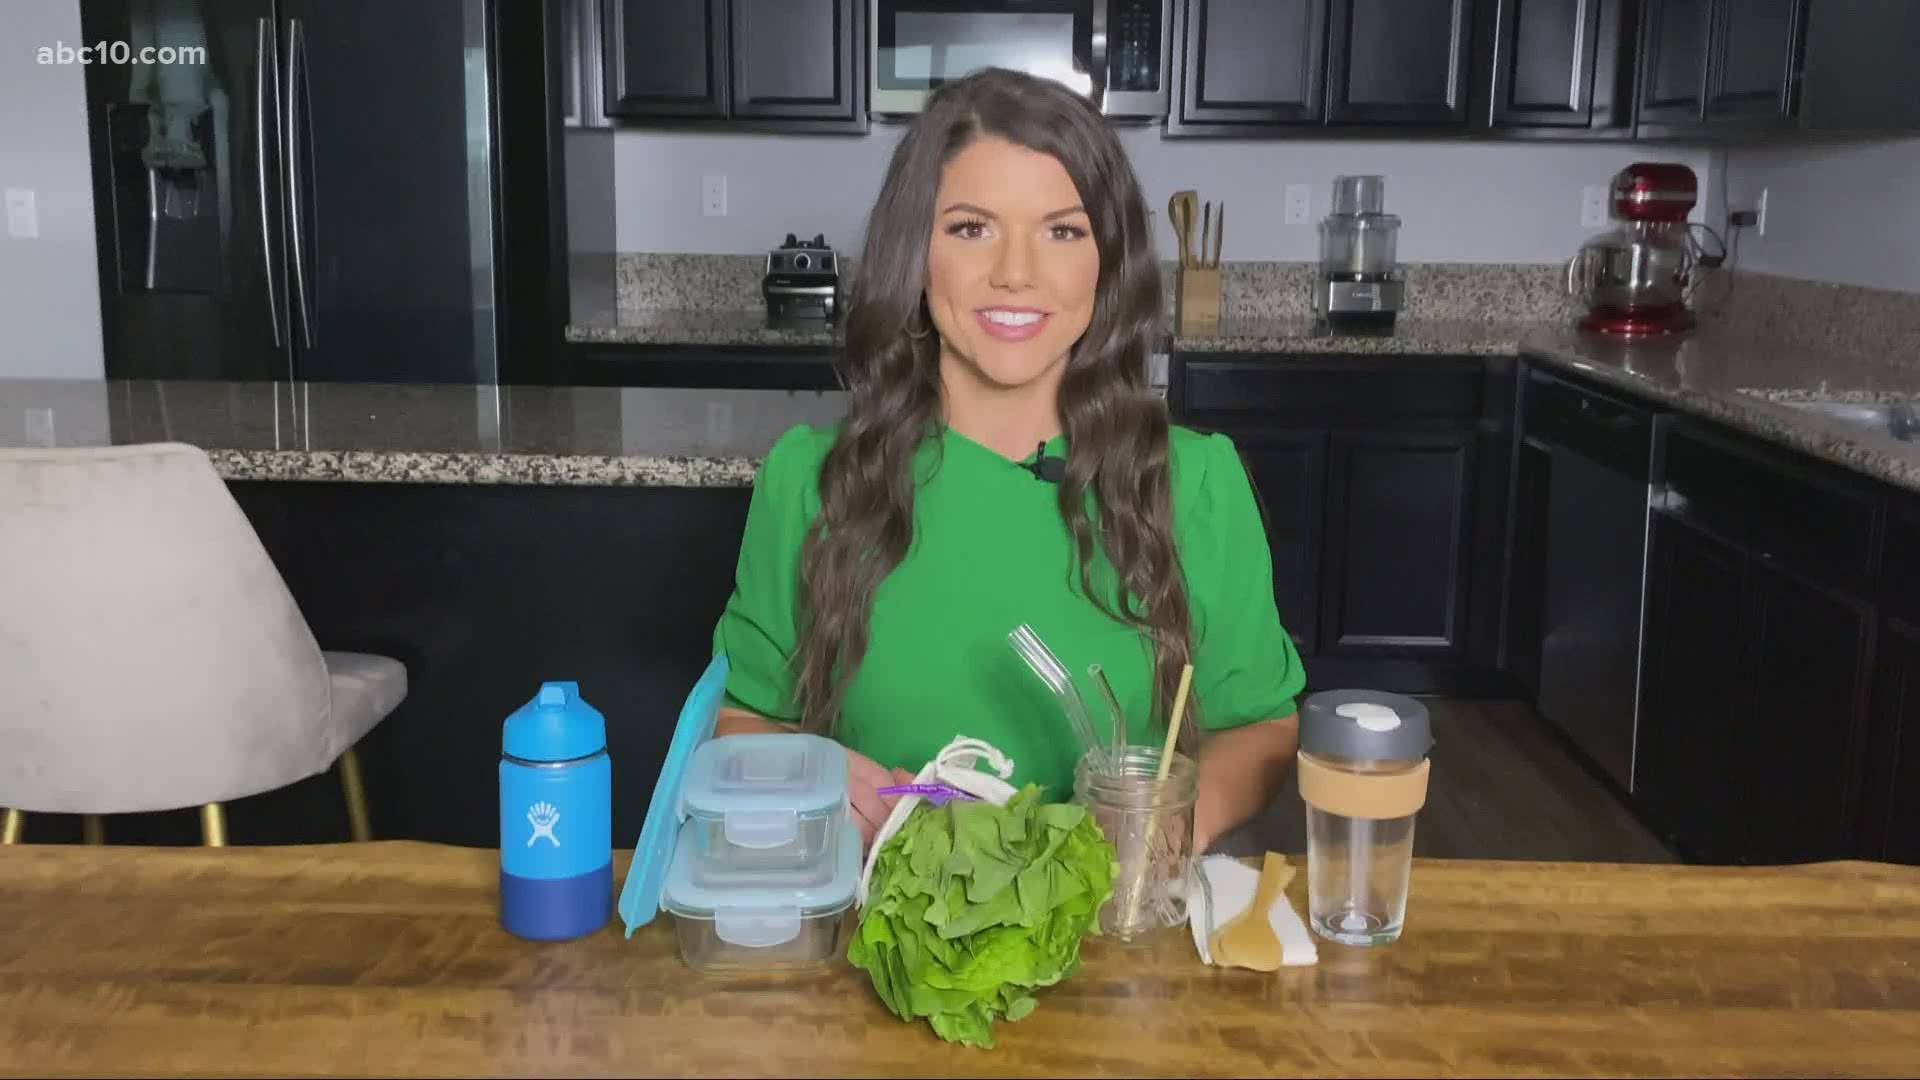 Besides pollution, plastic can also affect your health. Our Megan Evans shares some easy ways to reduce plastic use.